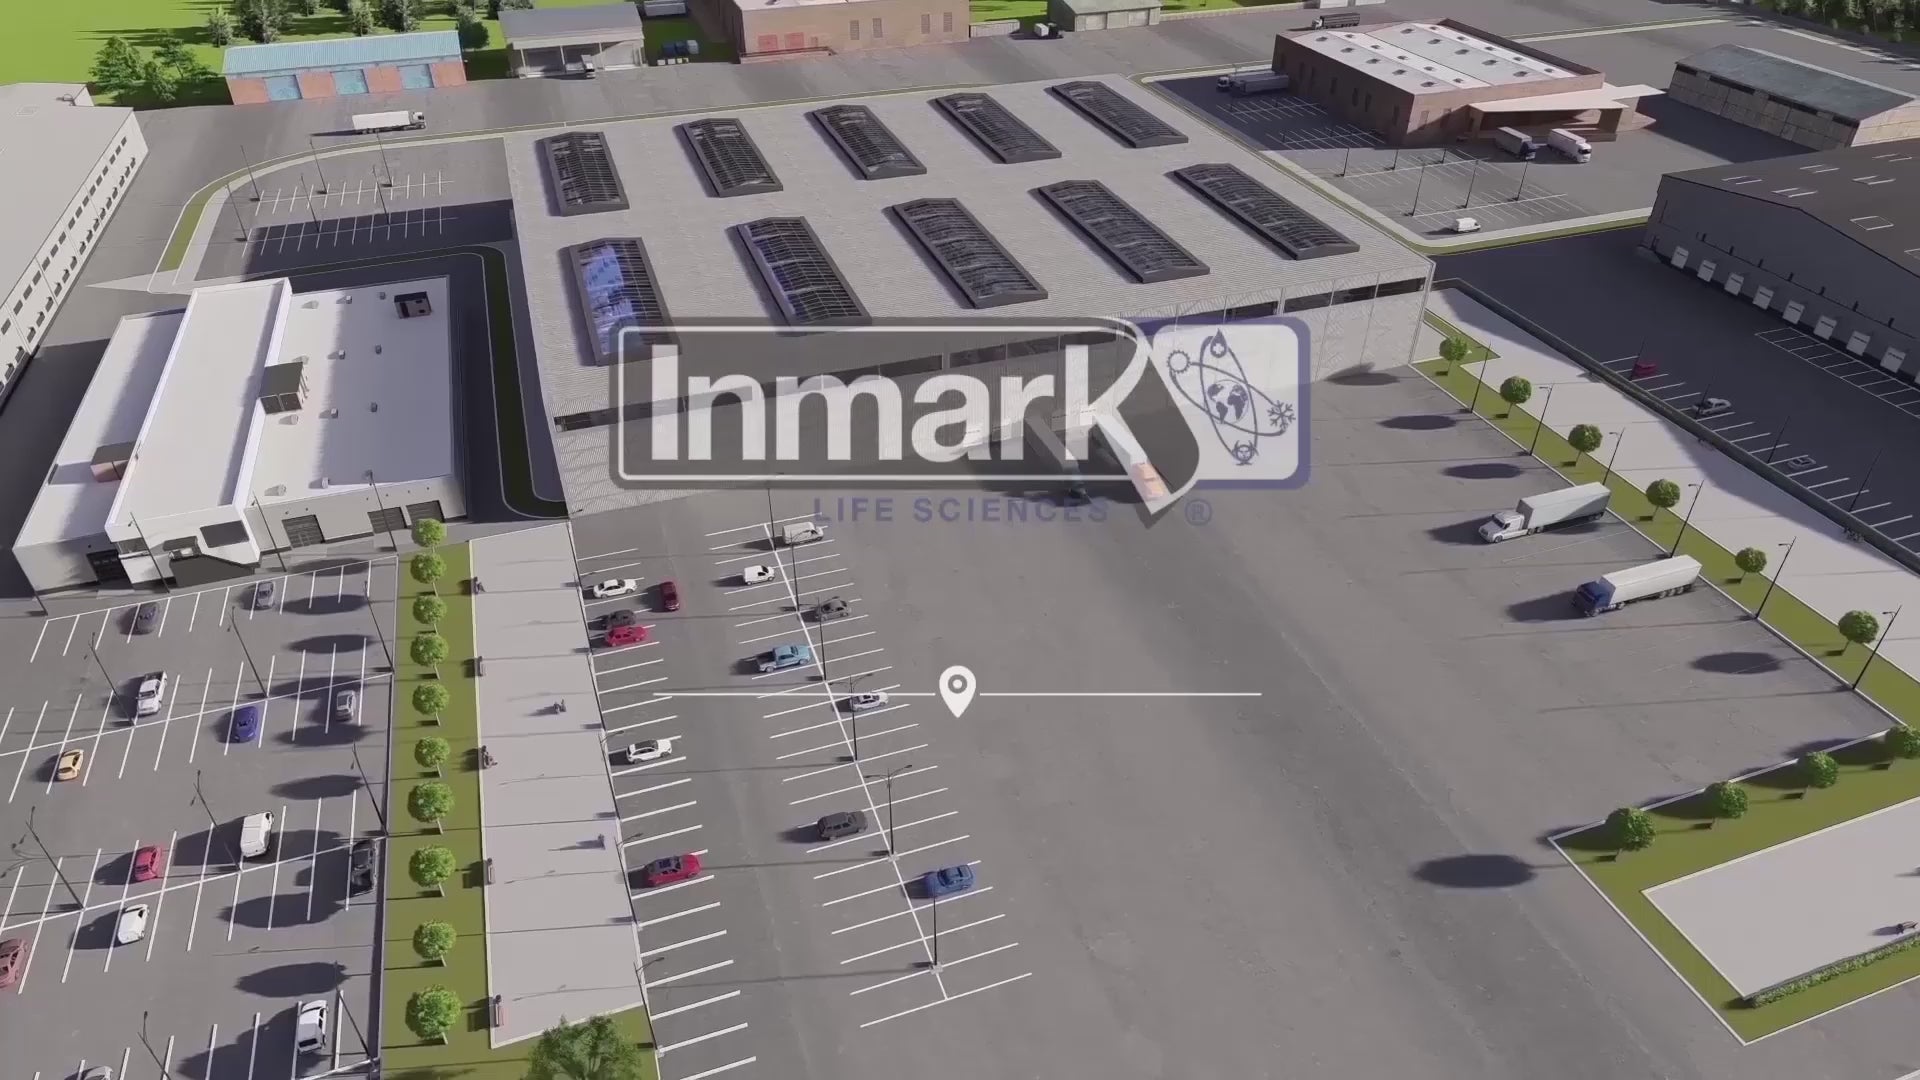 Load video: DISCOVER INMARK® LIFE SCIENCE TECHNOLOGIES